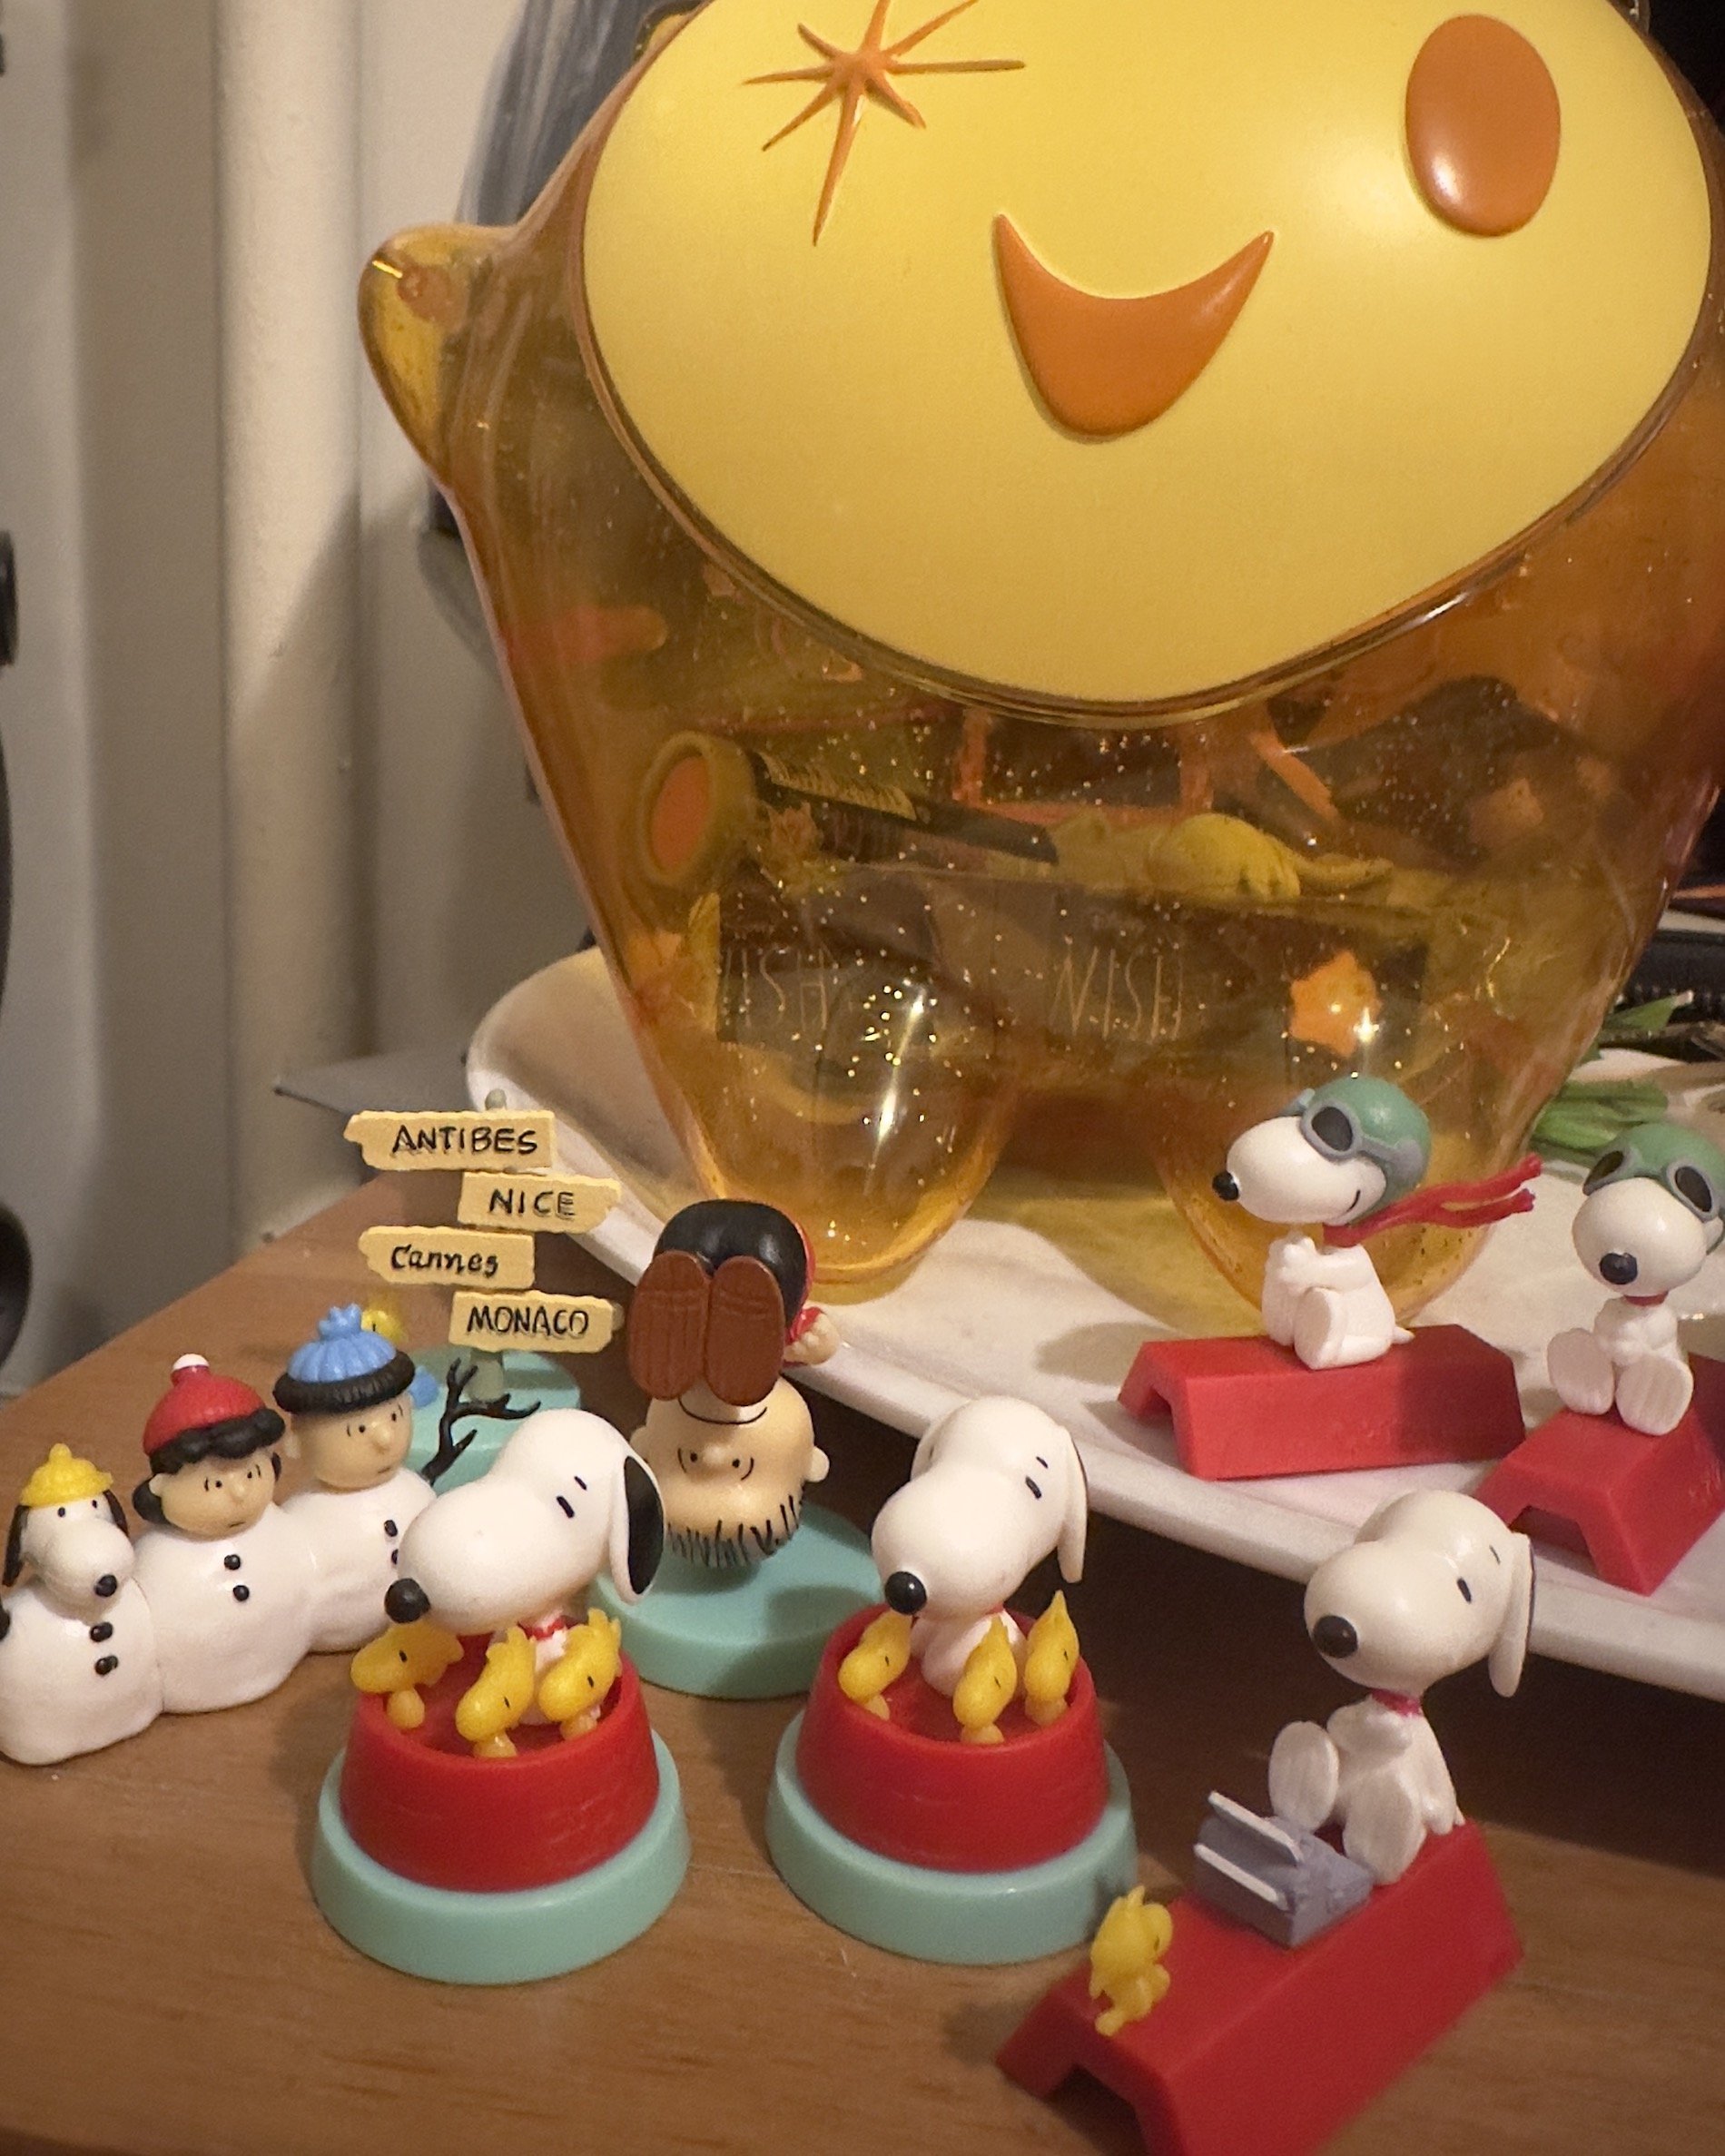 Adorable figures from the Peanuts Snoopy Chocolate Egg.jpg